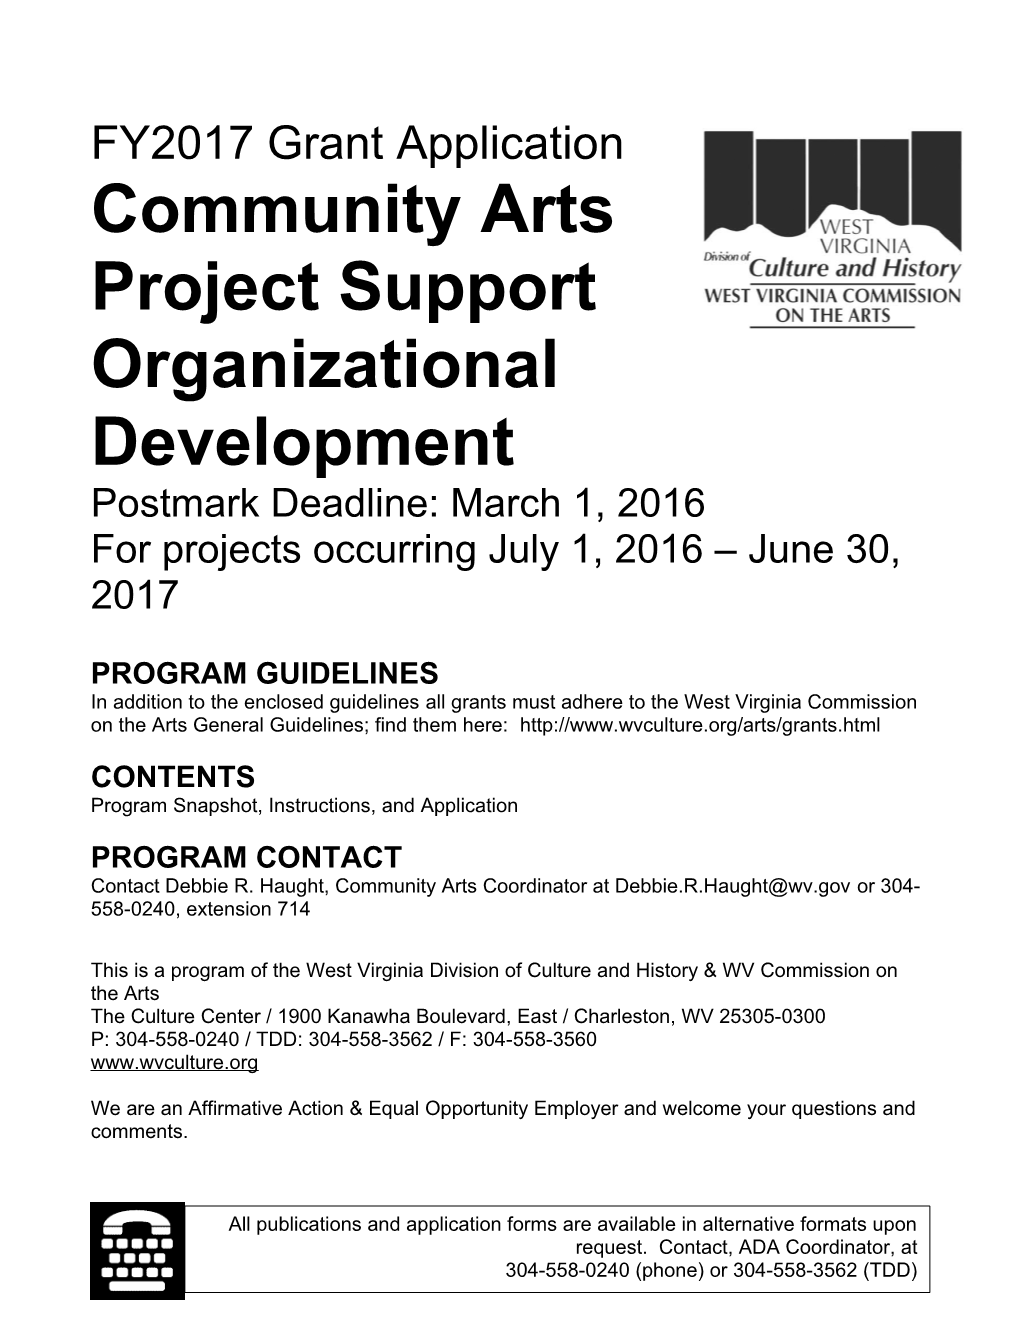 Community Arts Project Support